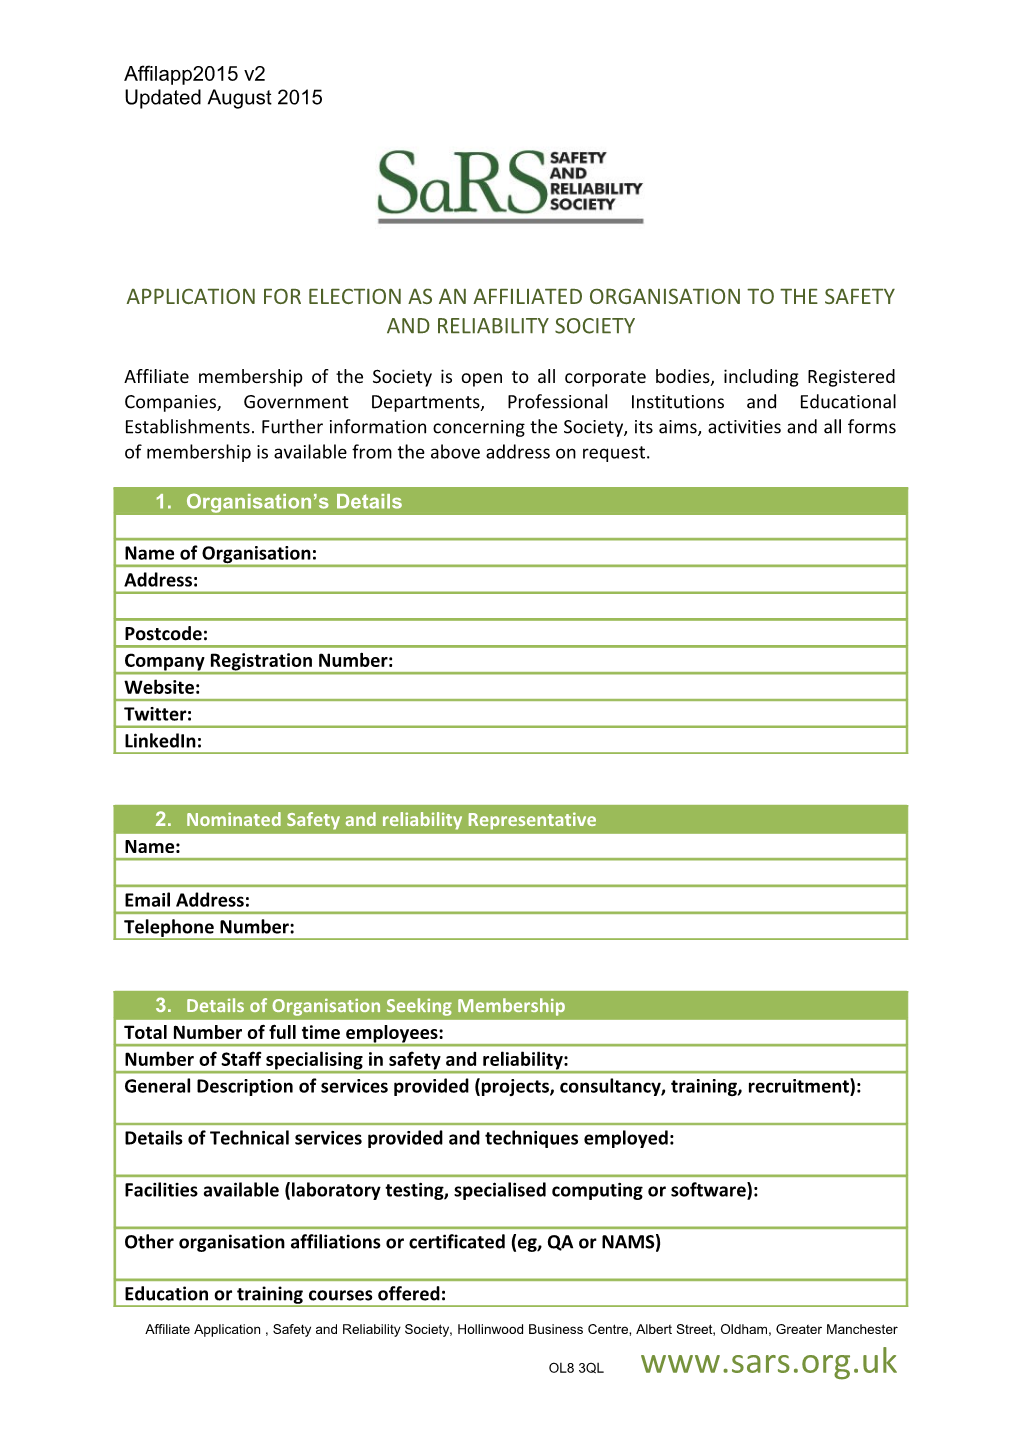 Application for Election As an Affiliated Organisation to the Safety and Reliability Society